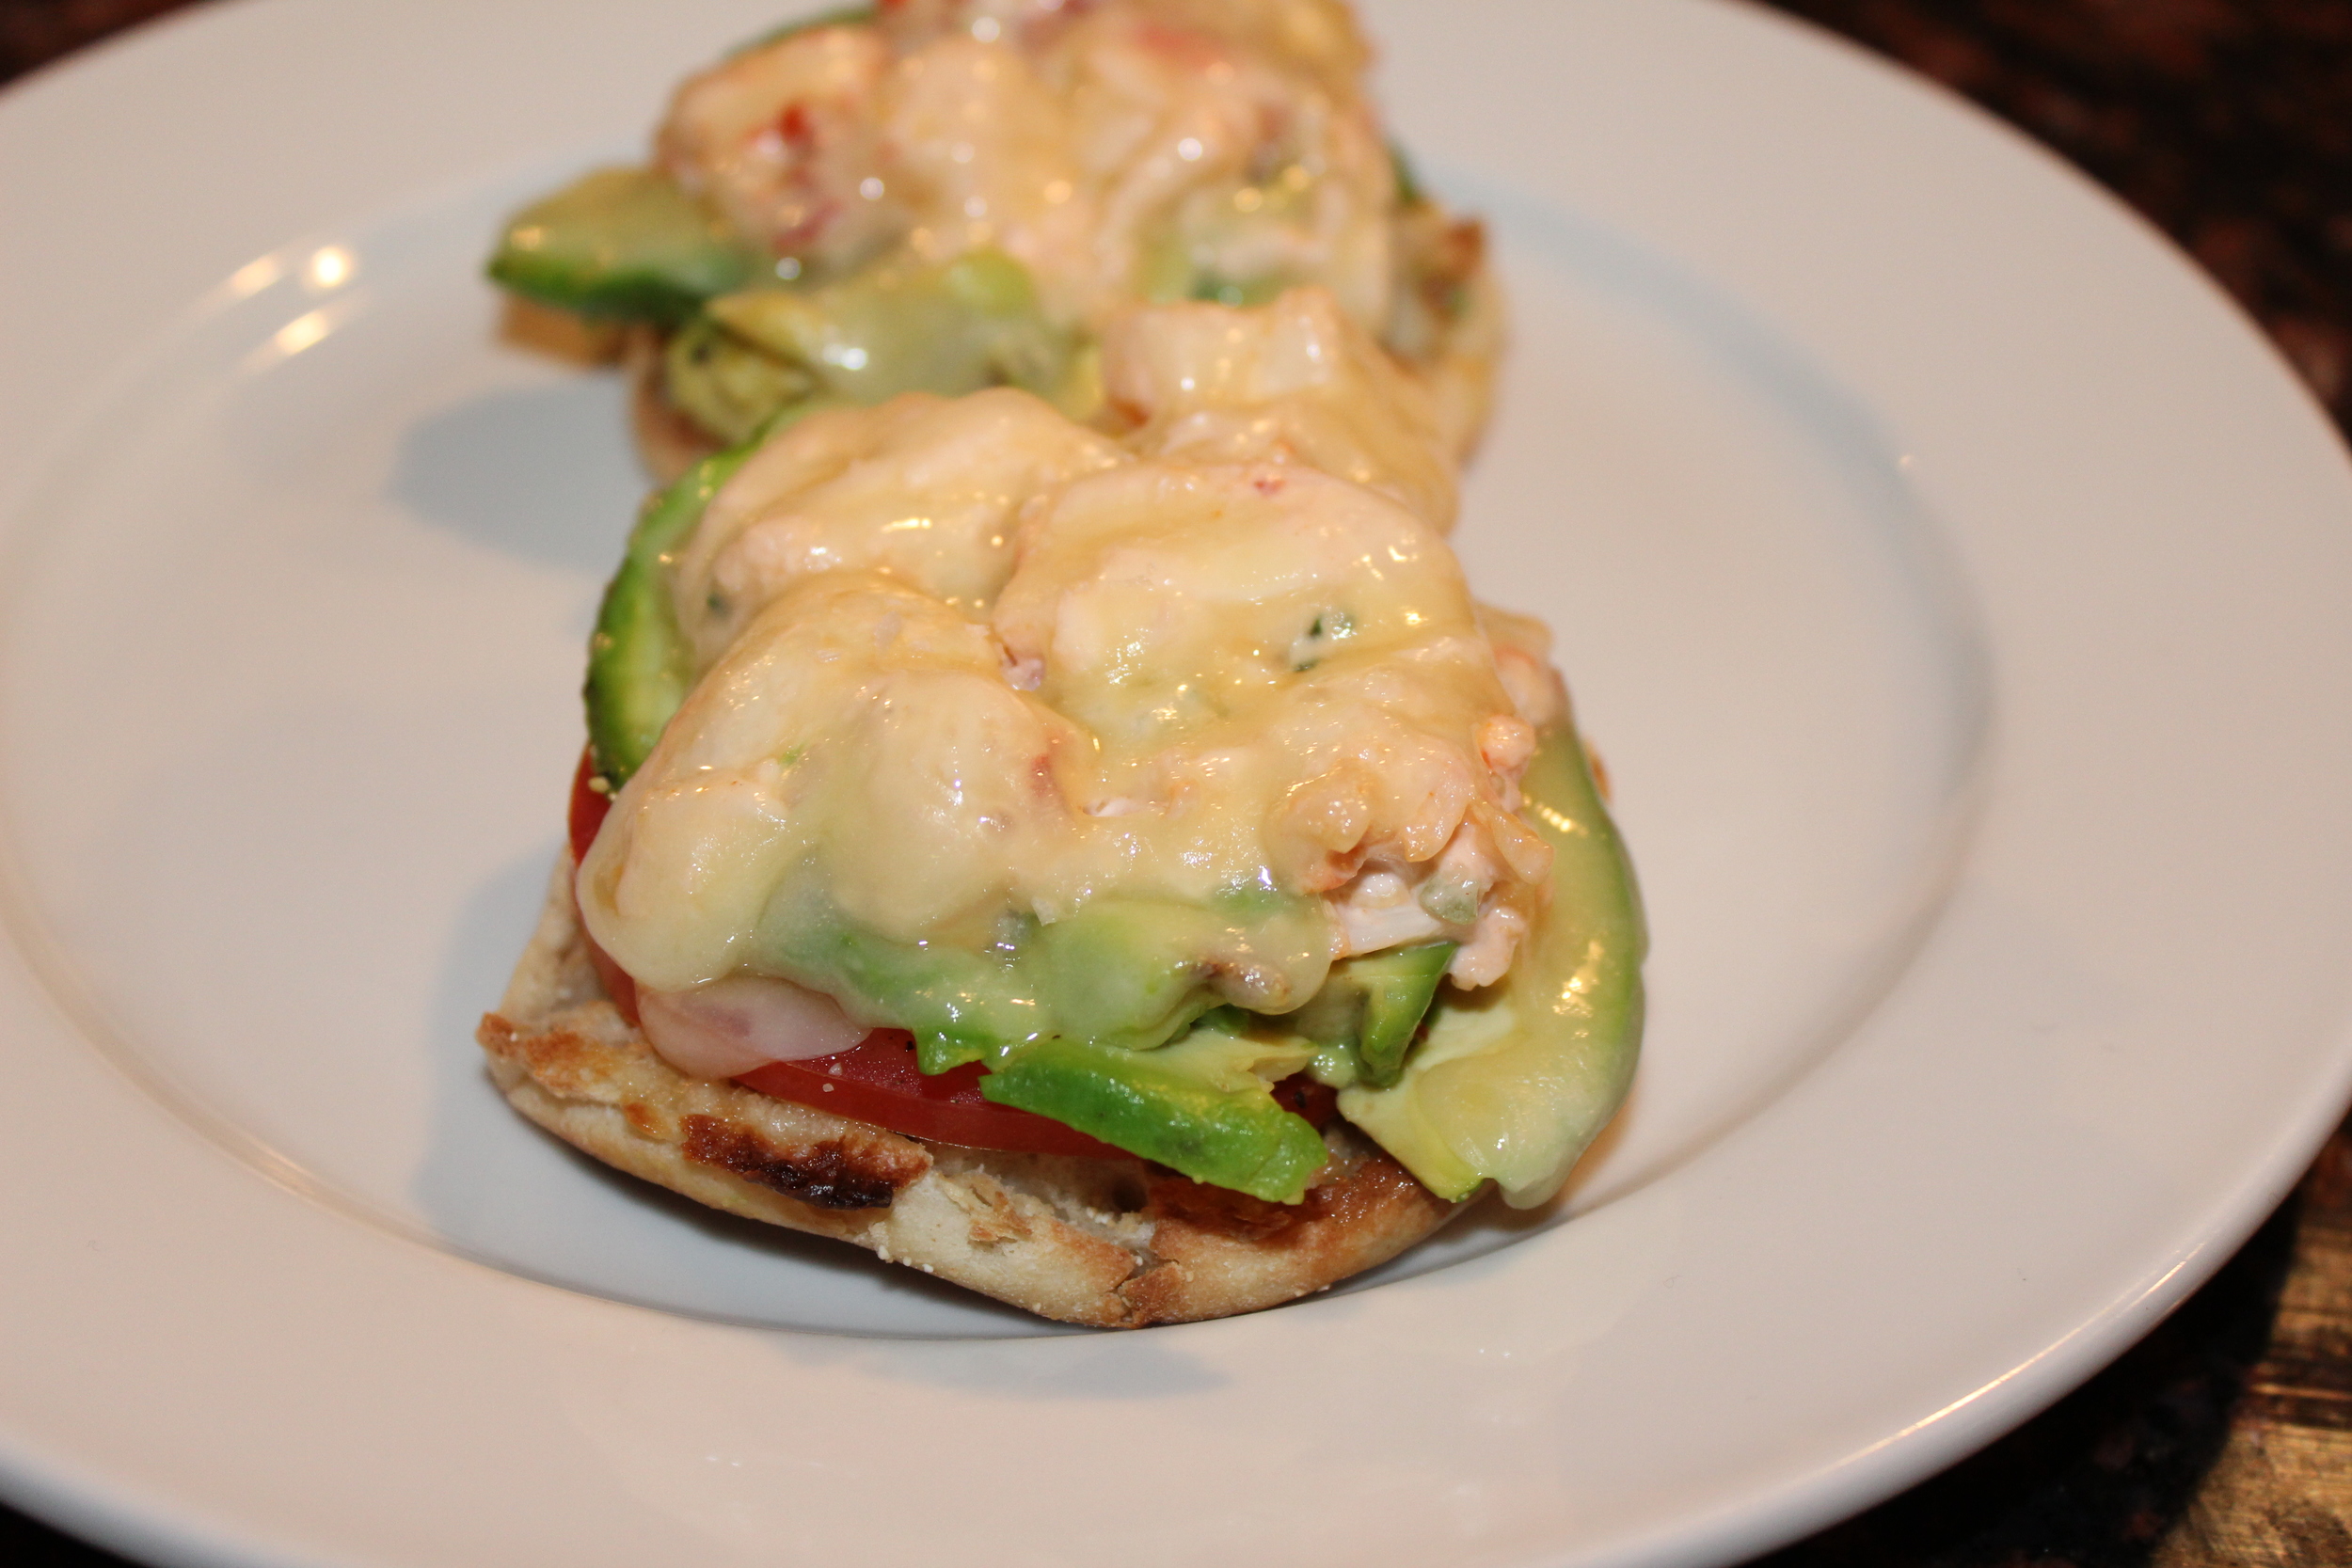 Lobster melts with avocado and tomato